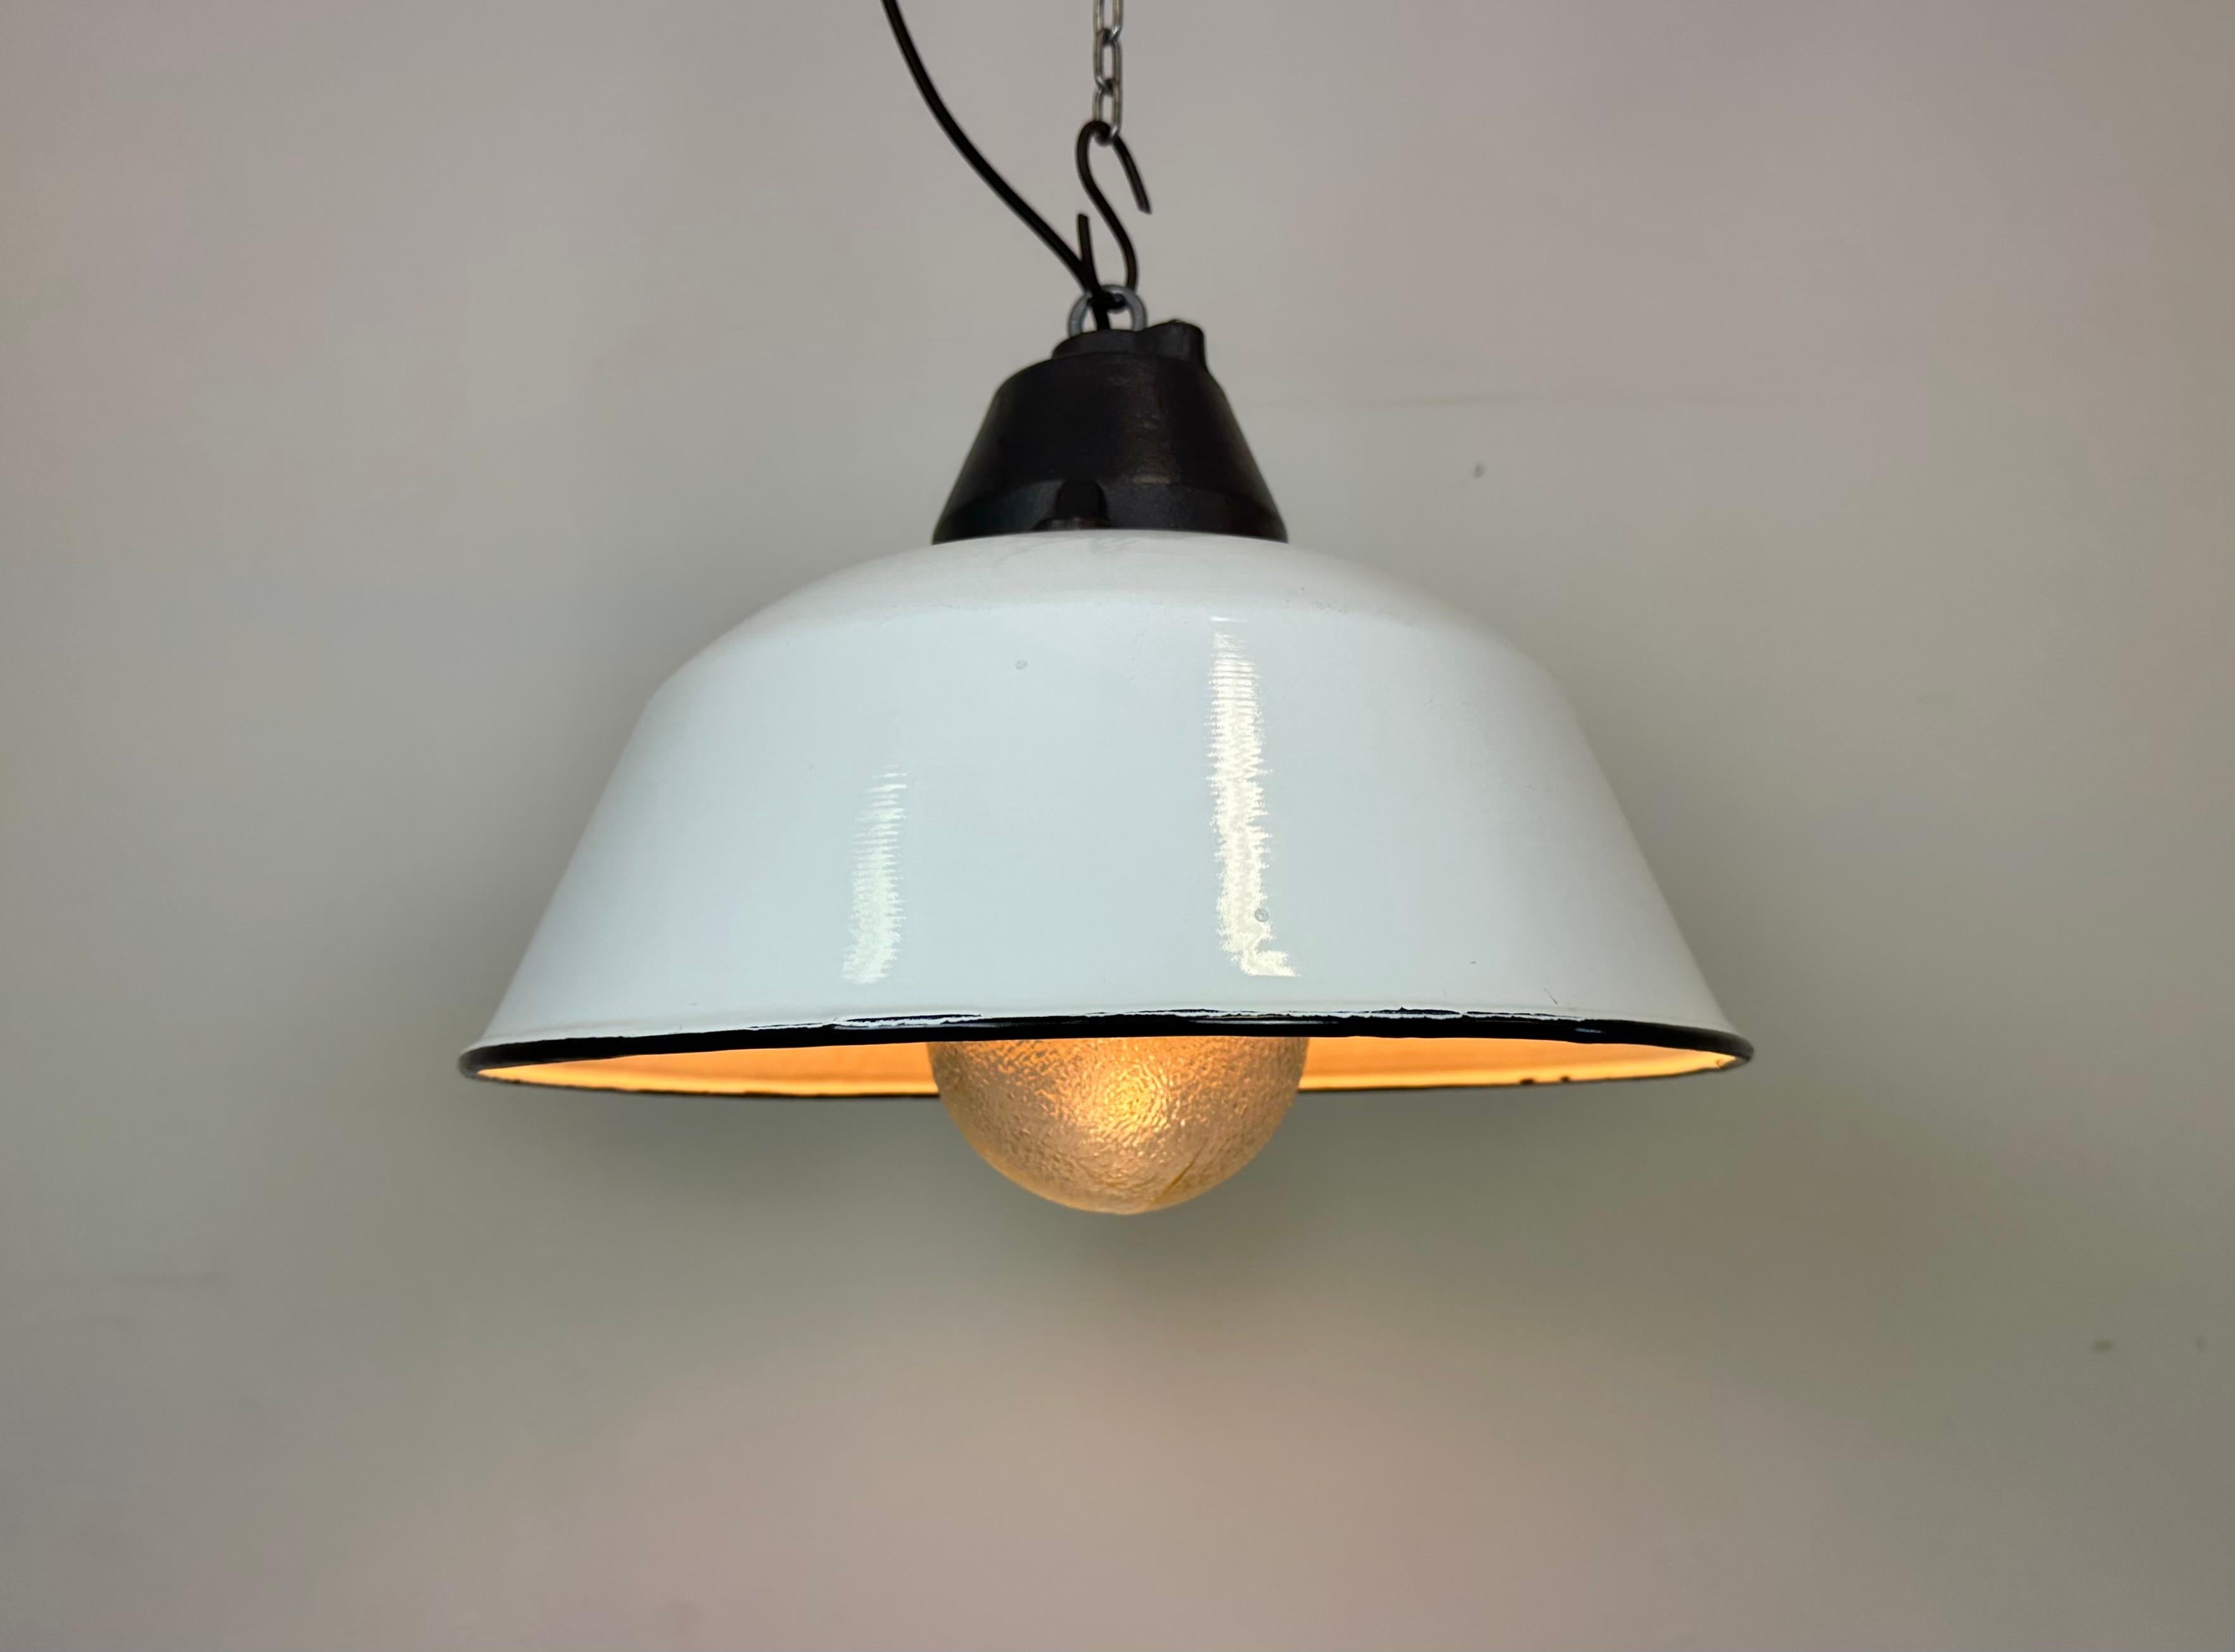 White Enamel and Cast Iron Industrial Pendant Light with Glass Cover, 1960s For Sale 5